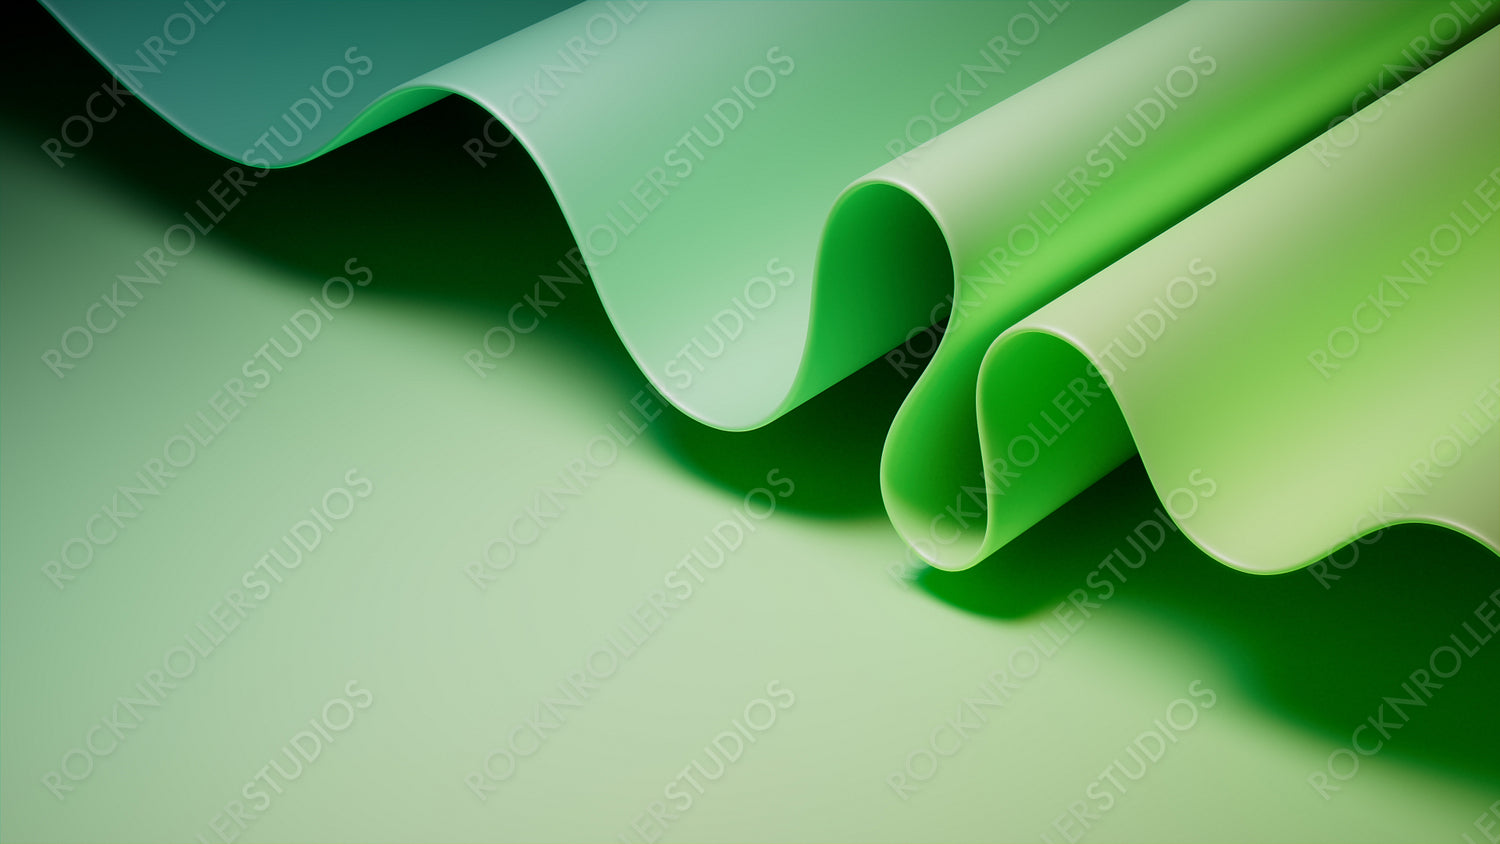 Green and Teal Curvy Wallpaper. Trendy 3D Gradient Background with Copy-Space.